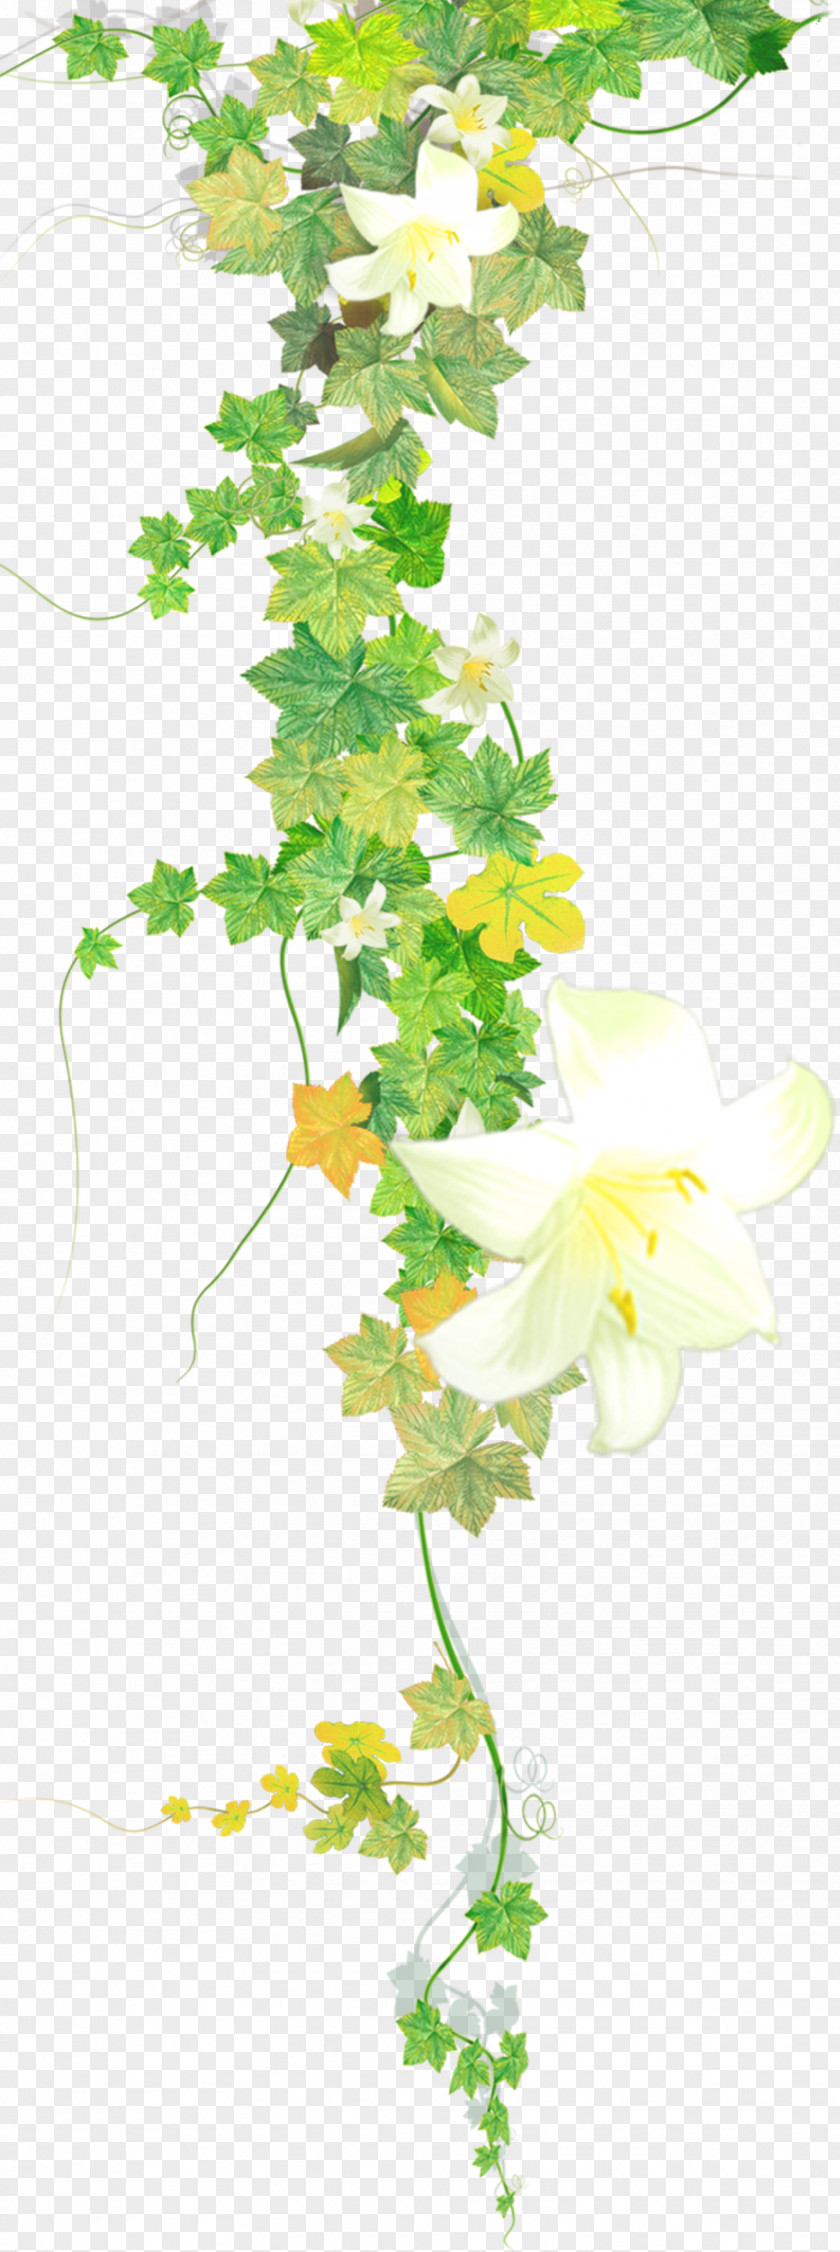 Twig Cut Flowers Watercolor Flower Background PNG